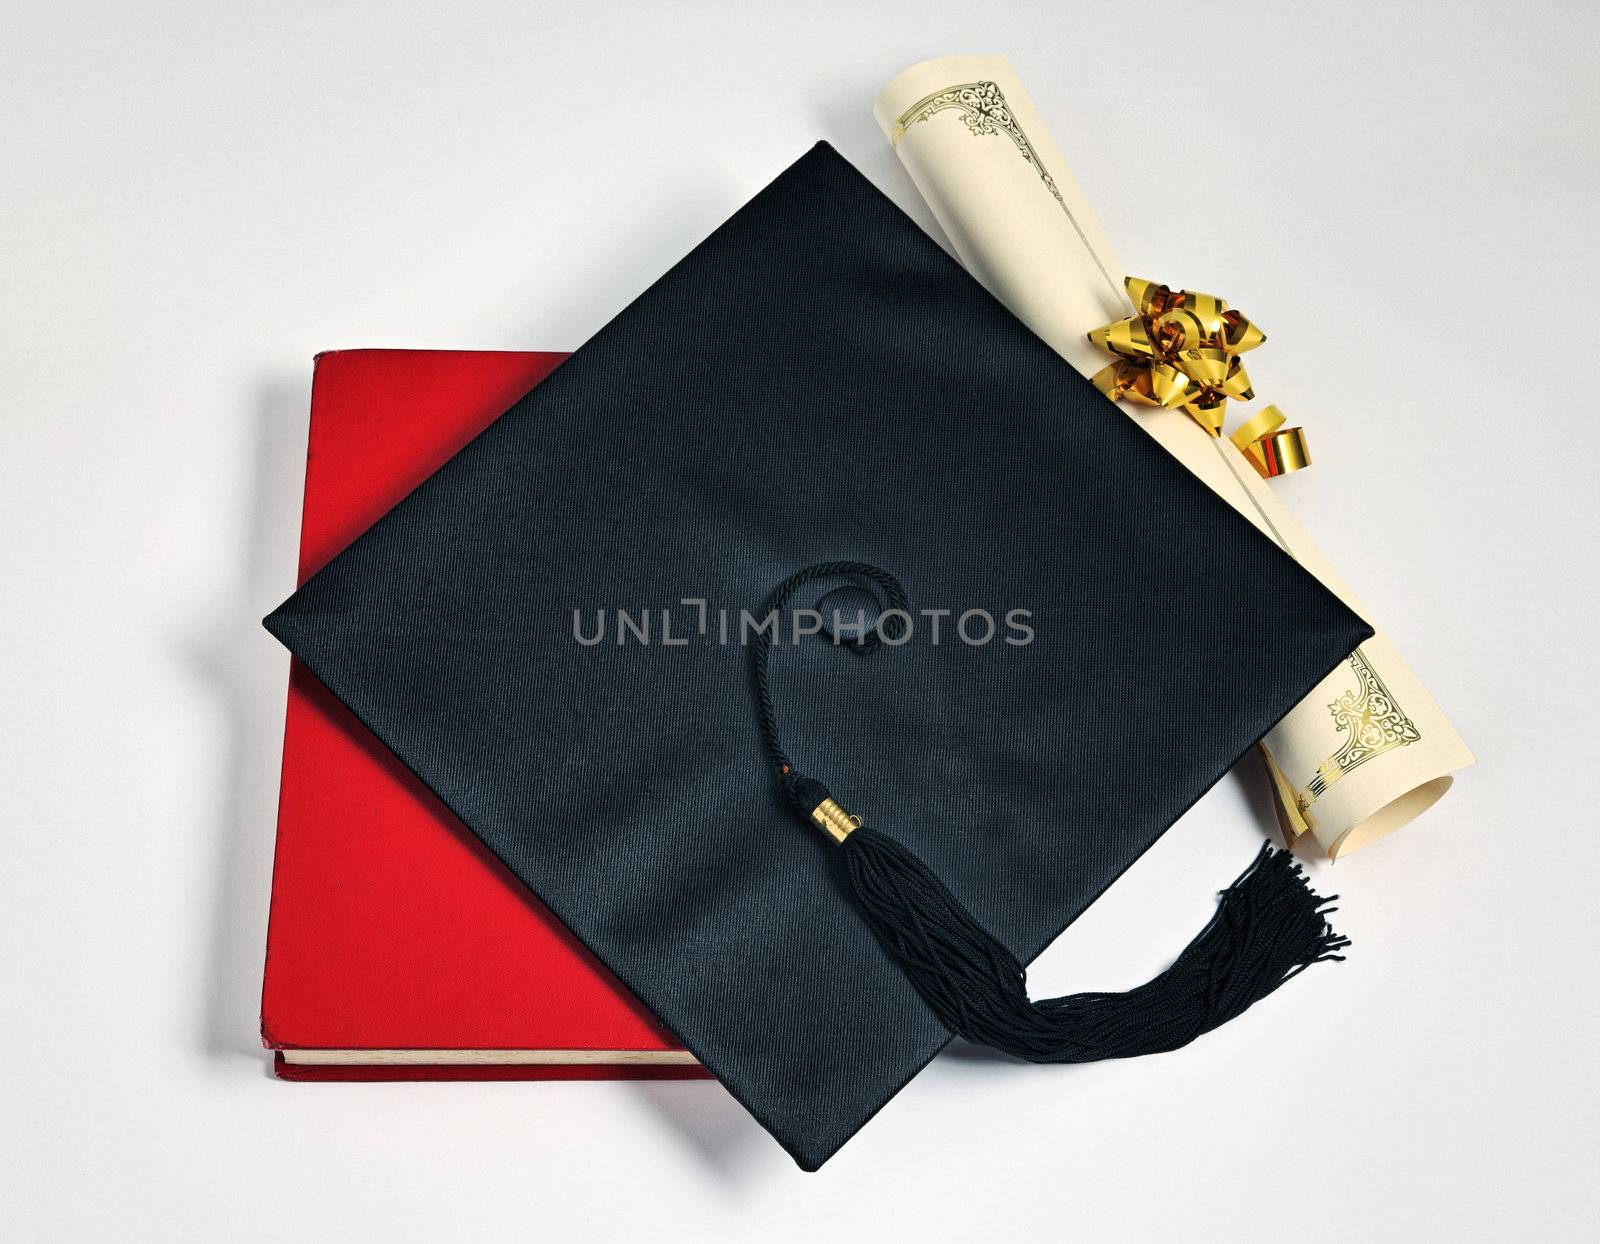 Graduation cap and diploma on the plain background

